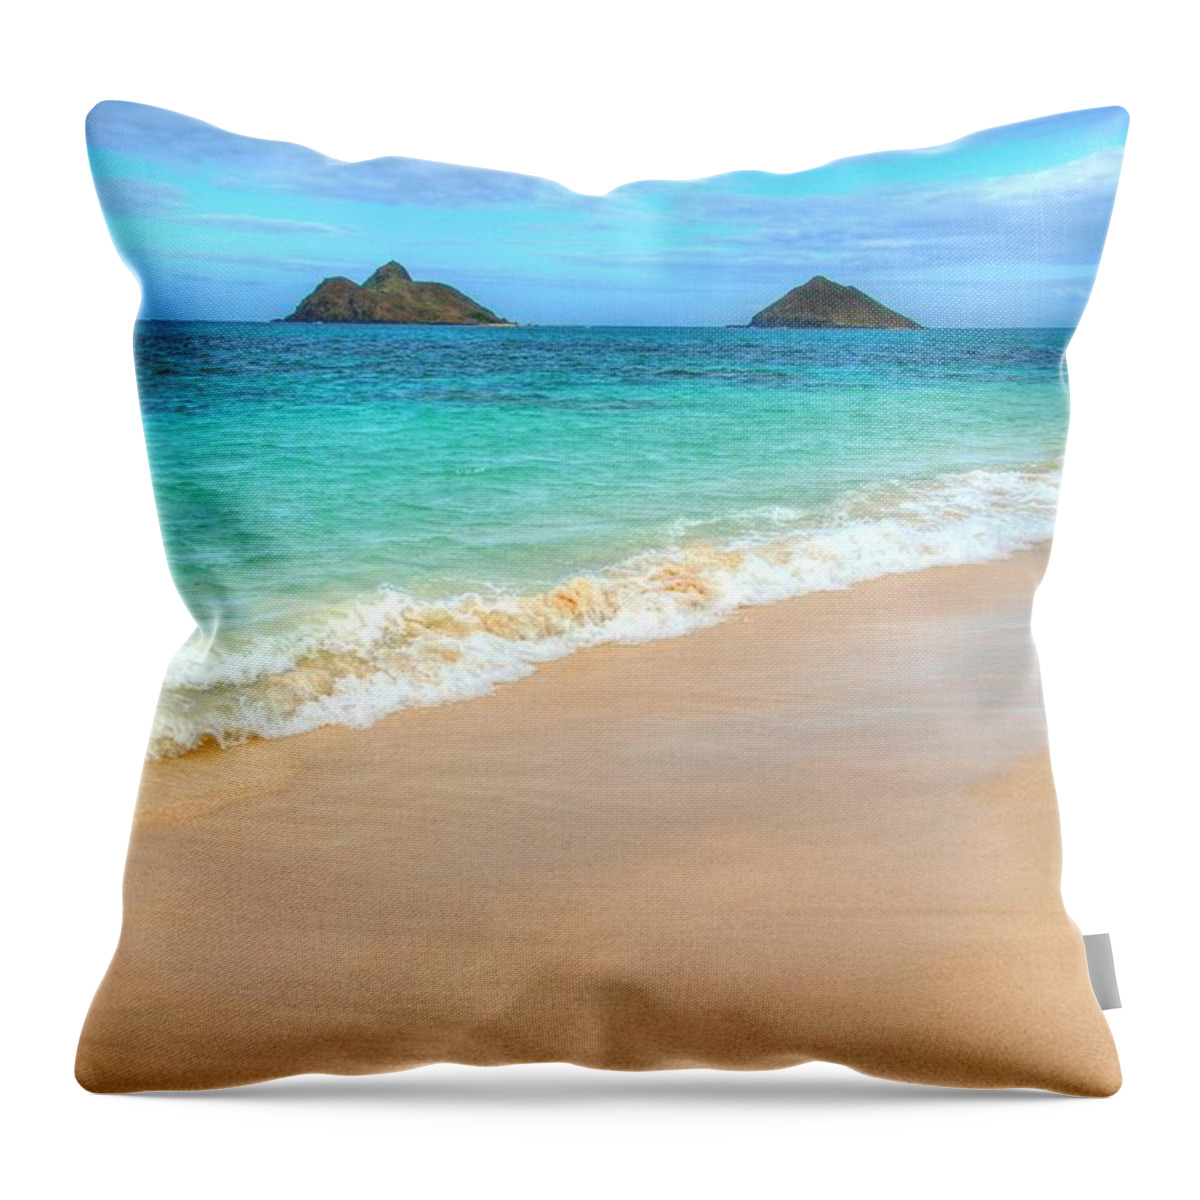 Mokulua Islands Throw Pillow featuring the photograph The Mokes by Kelly Wade